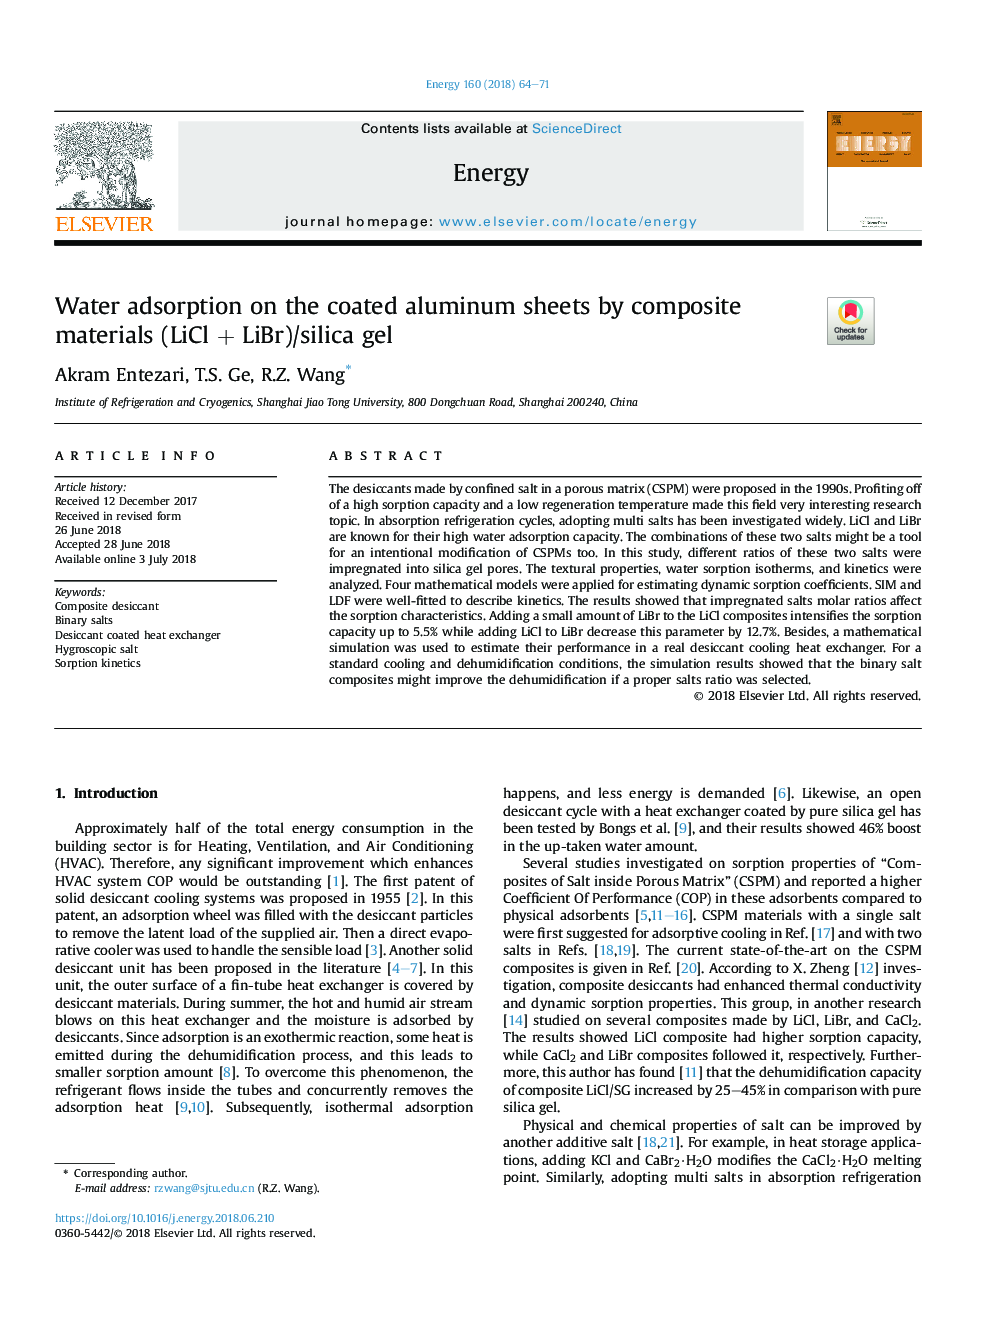 Water adsorption on the coated aluminum sheets by composite materials (LiClÂ +Â LiBr)/silica gel